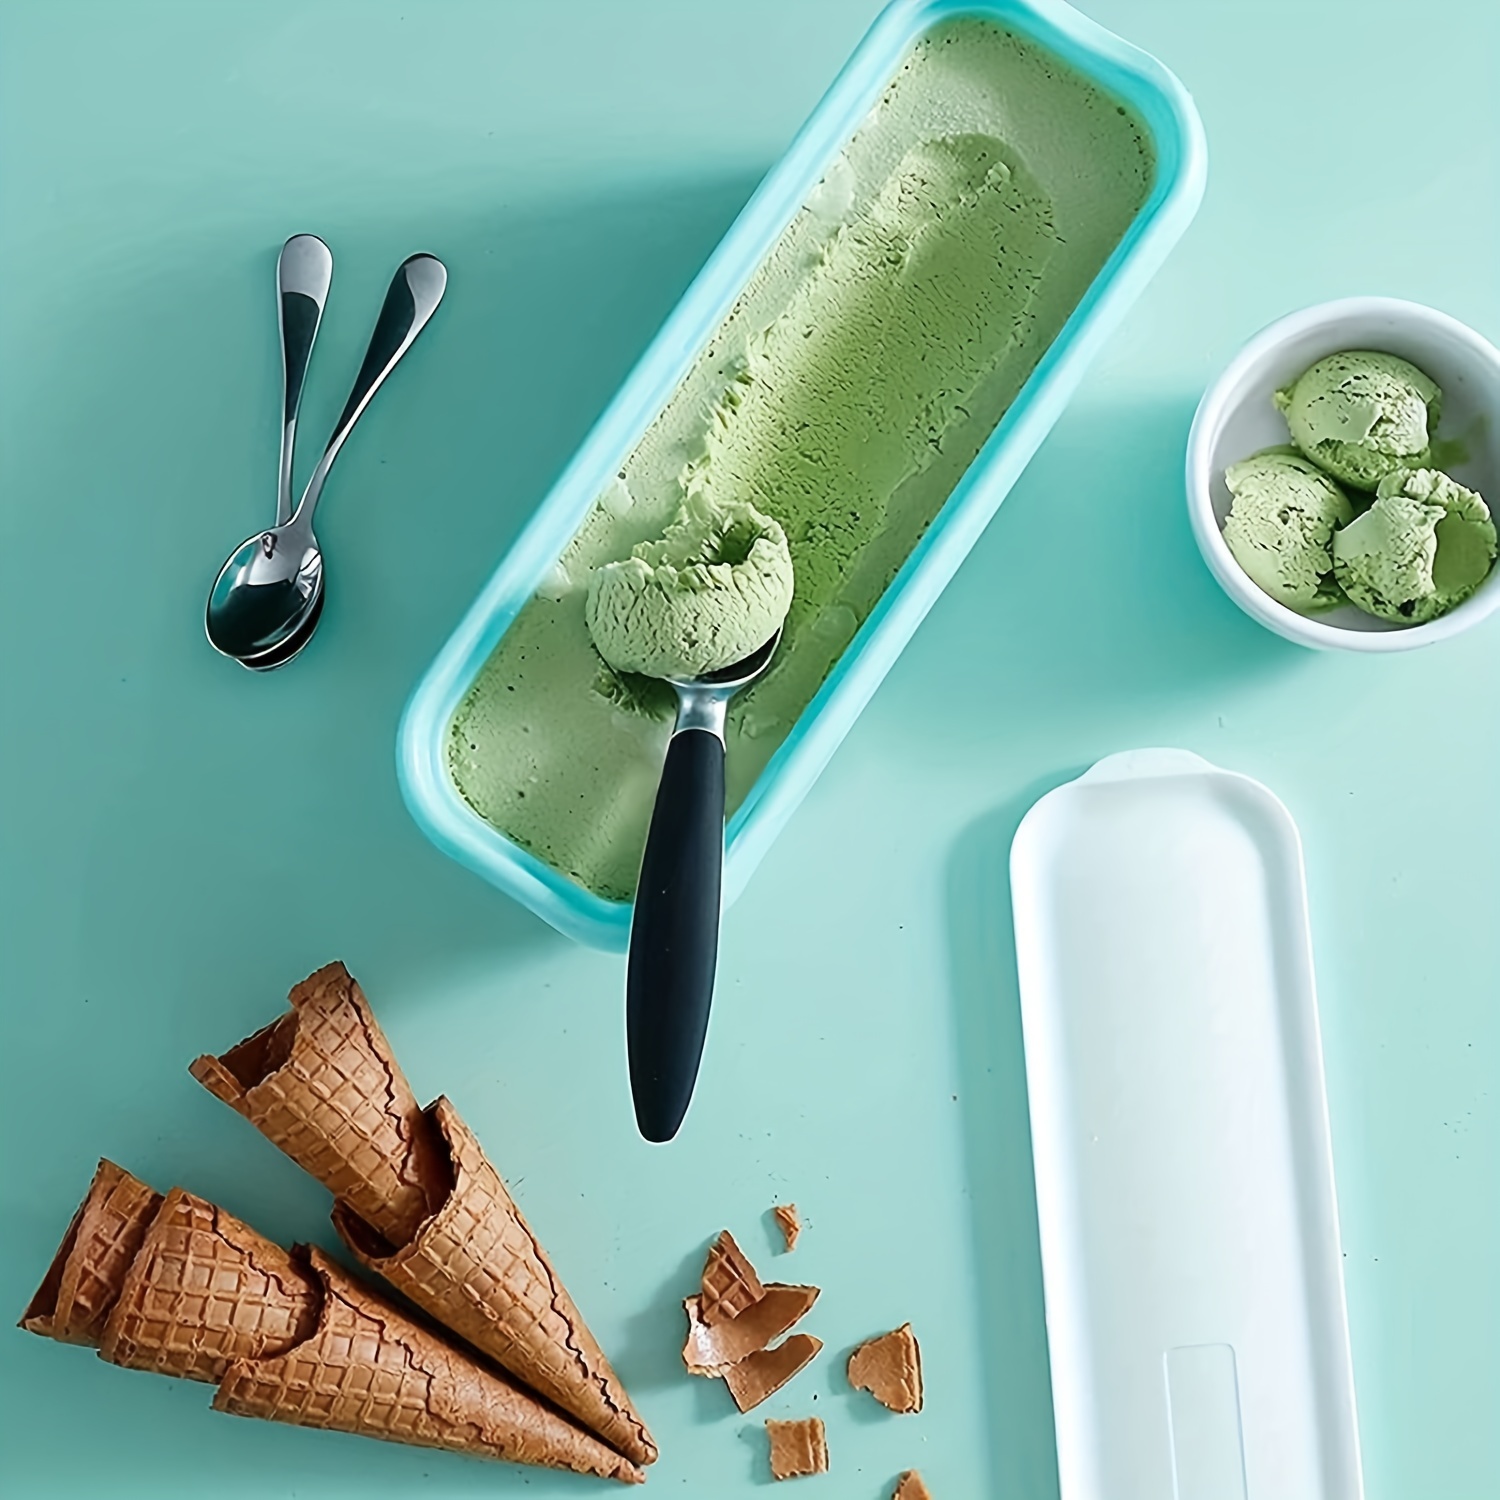 Check out this AMAZING double insulated Ice Cream container by SUMO, t